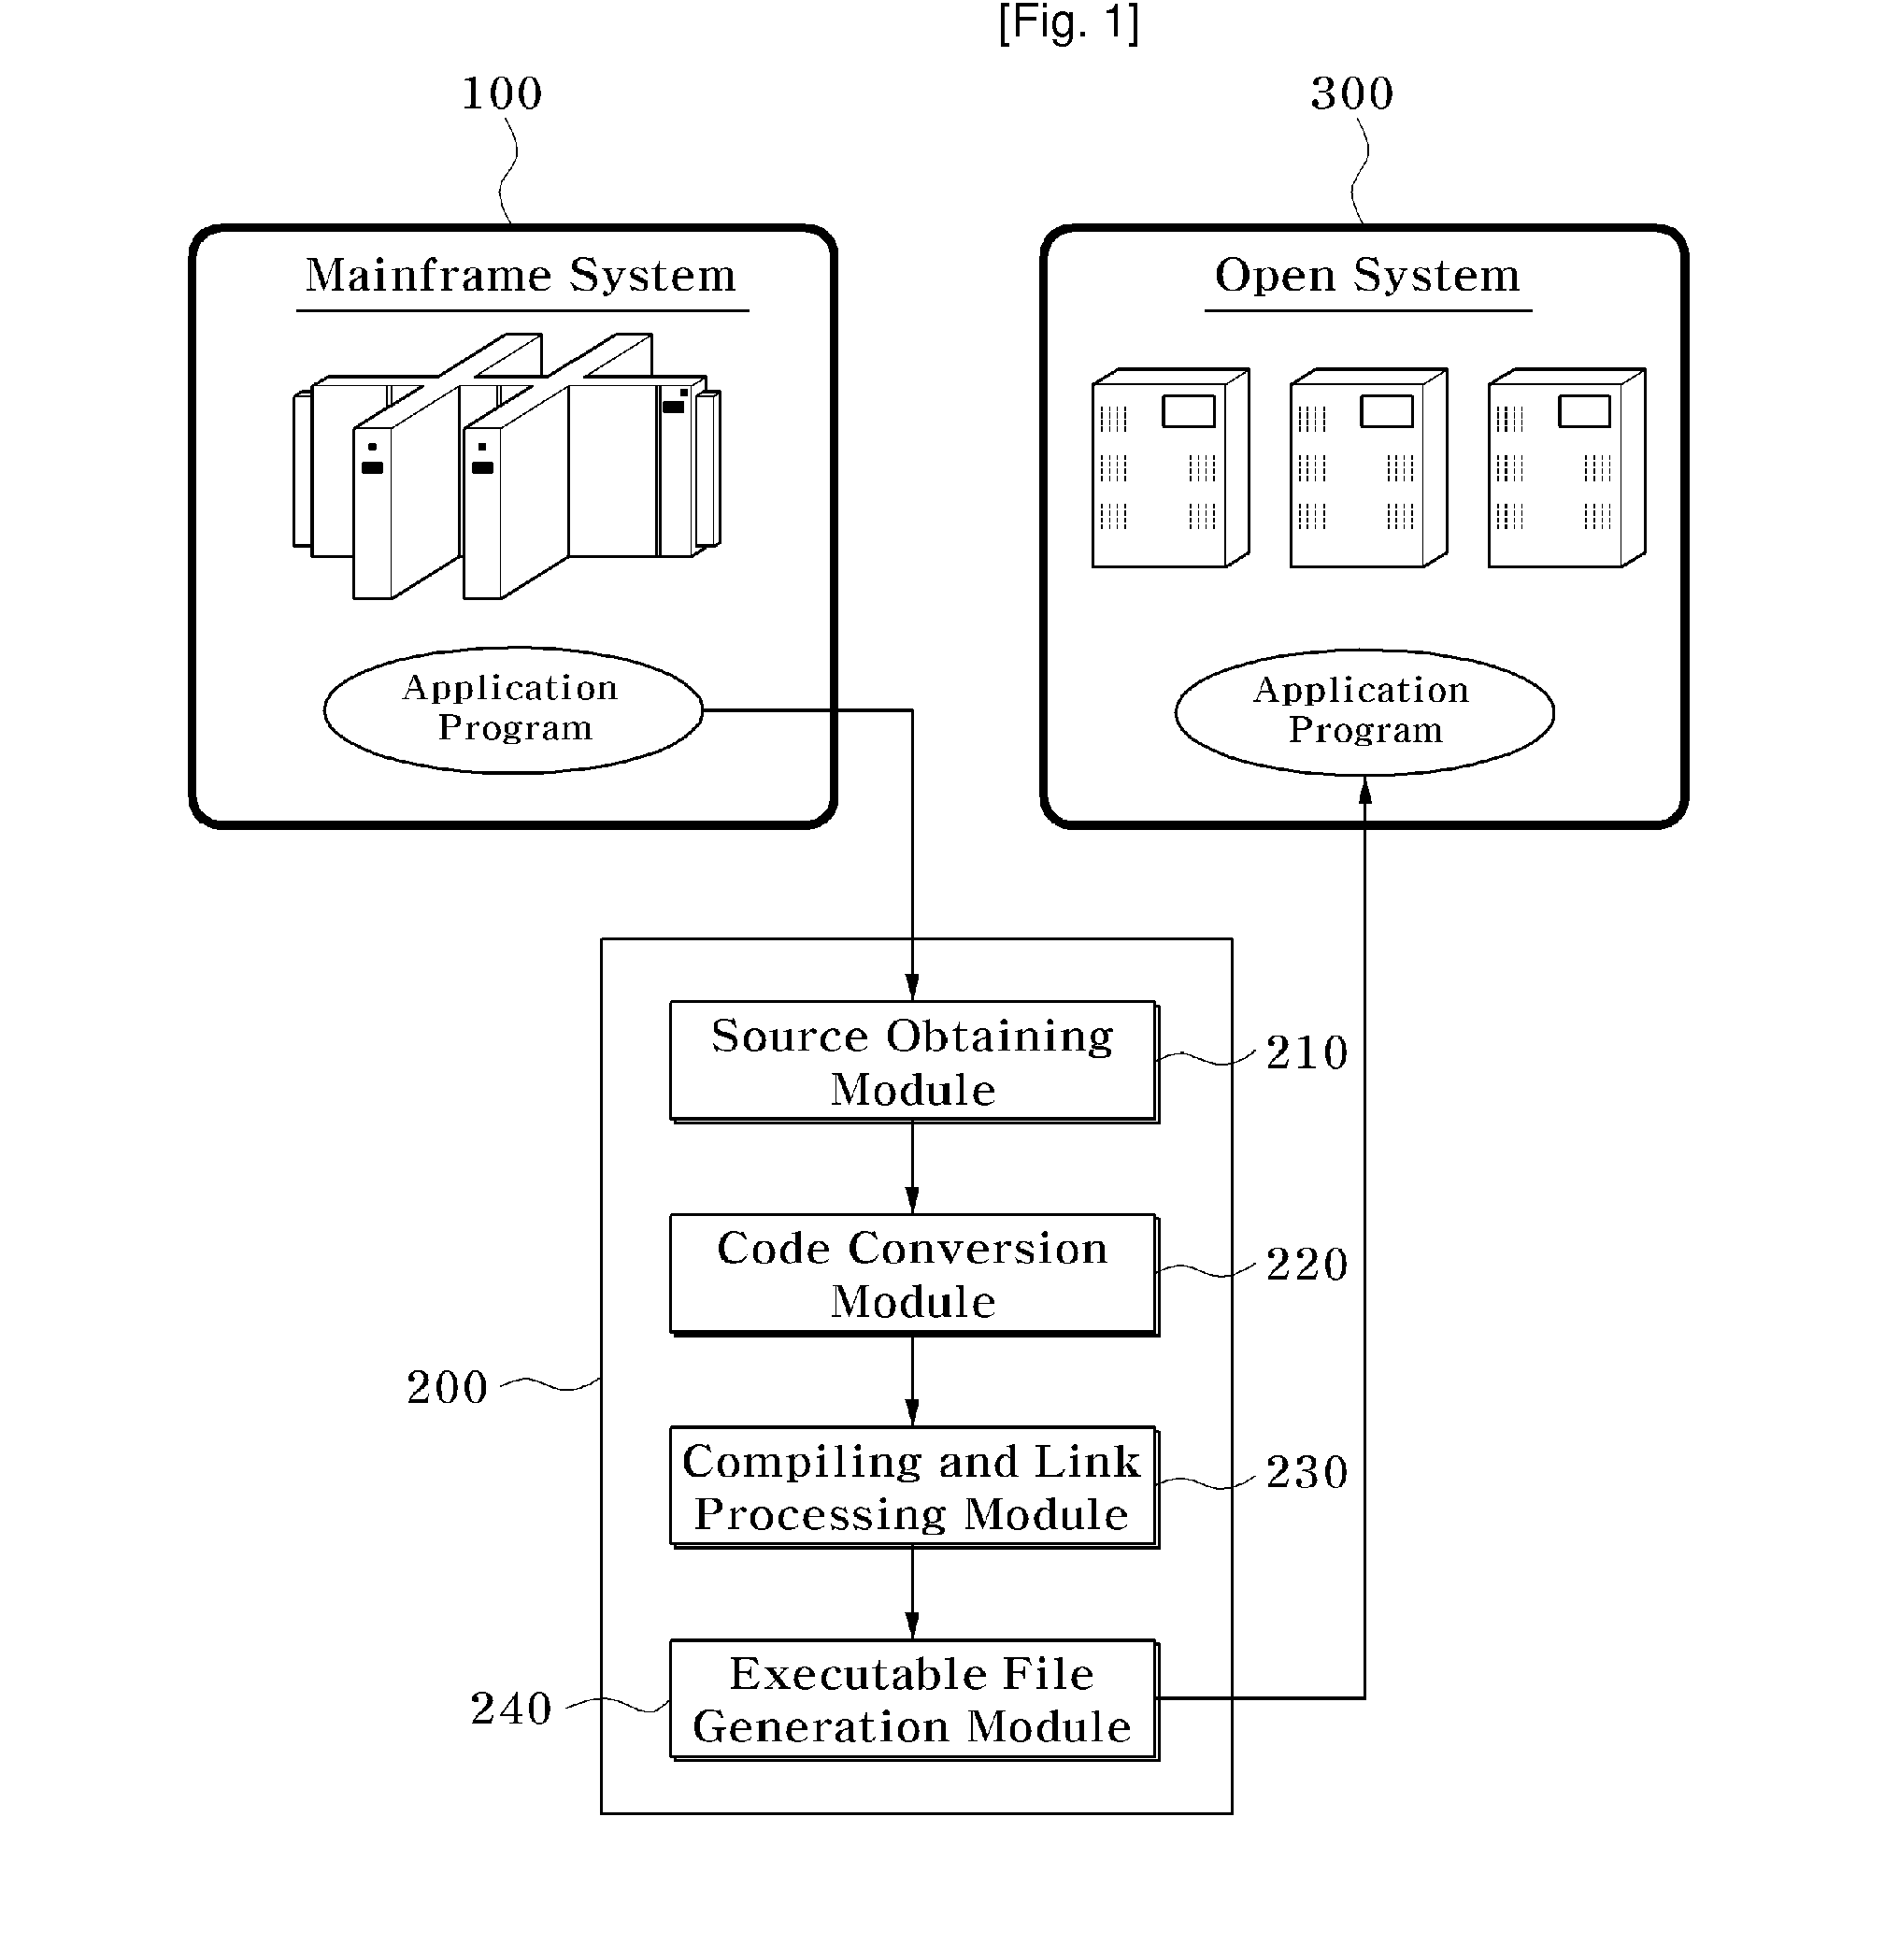 Migration Apparatus Which Convert Application Program of Mainframe System into Application Program of Open System and Method for Thereof